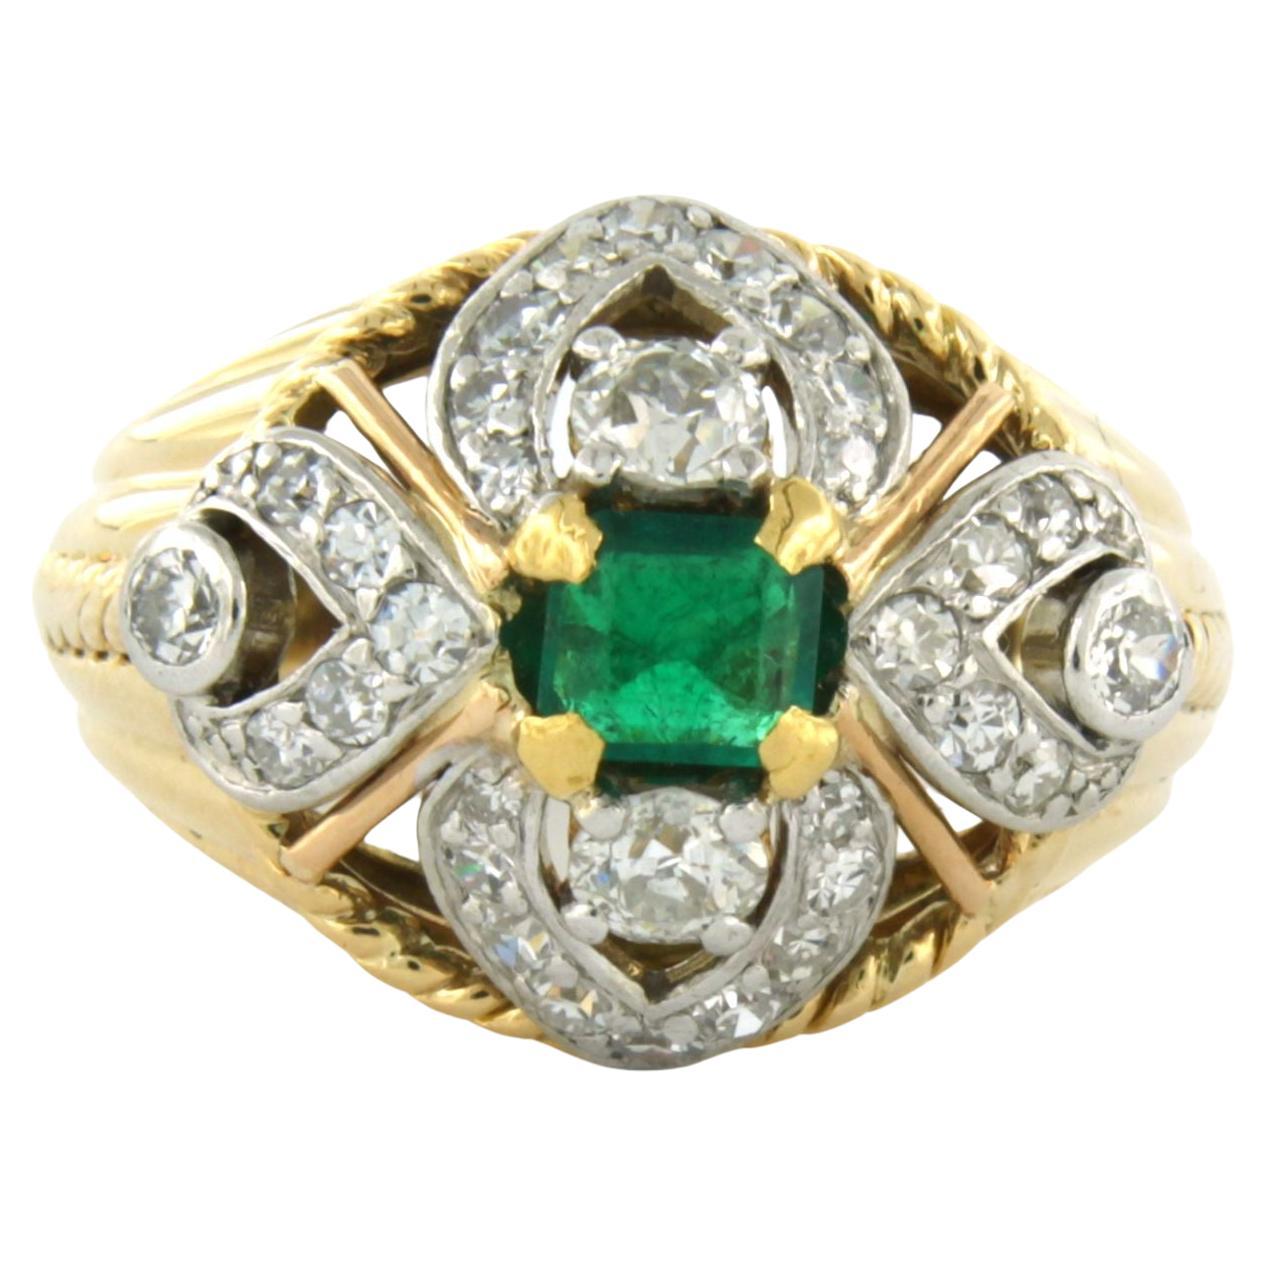 ART NOUVEAU ring set with emerald and diamond 18k bicolor gold